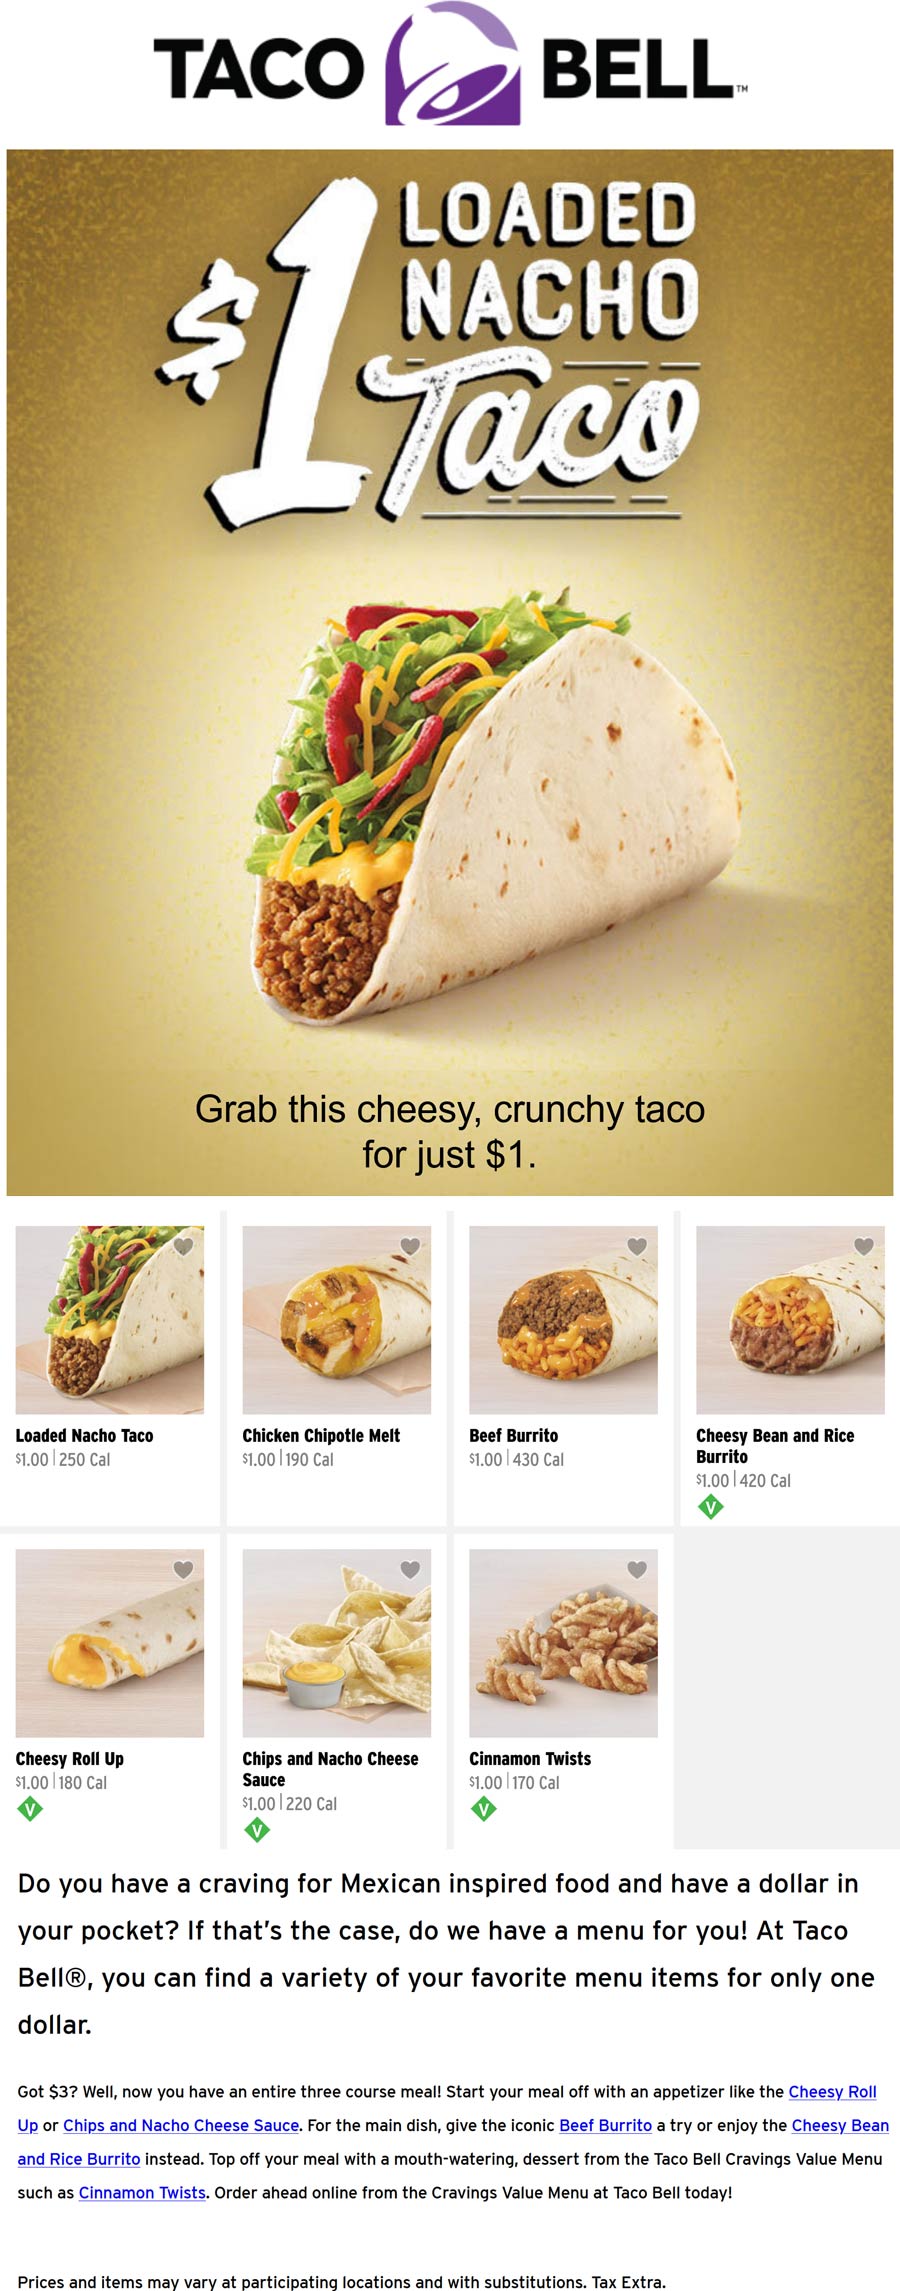 Taco Bell restaurants Coupon  Loaded nacho taco & more on the $1 value menu at Taco Bell #tacobell 